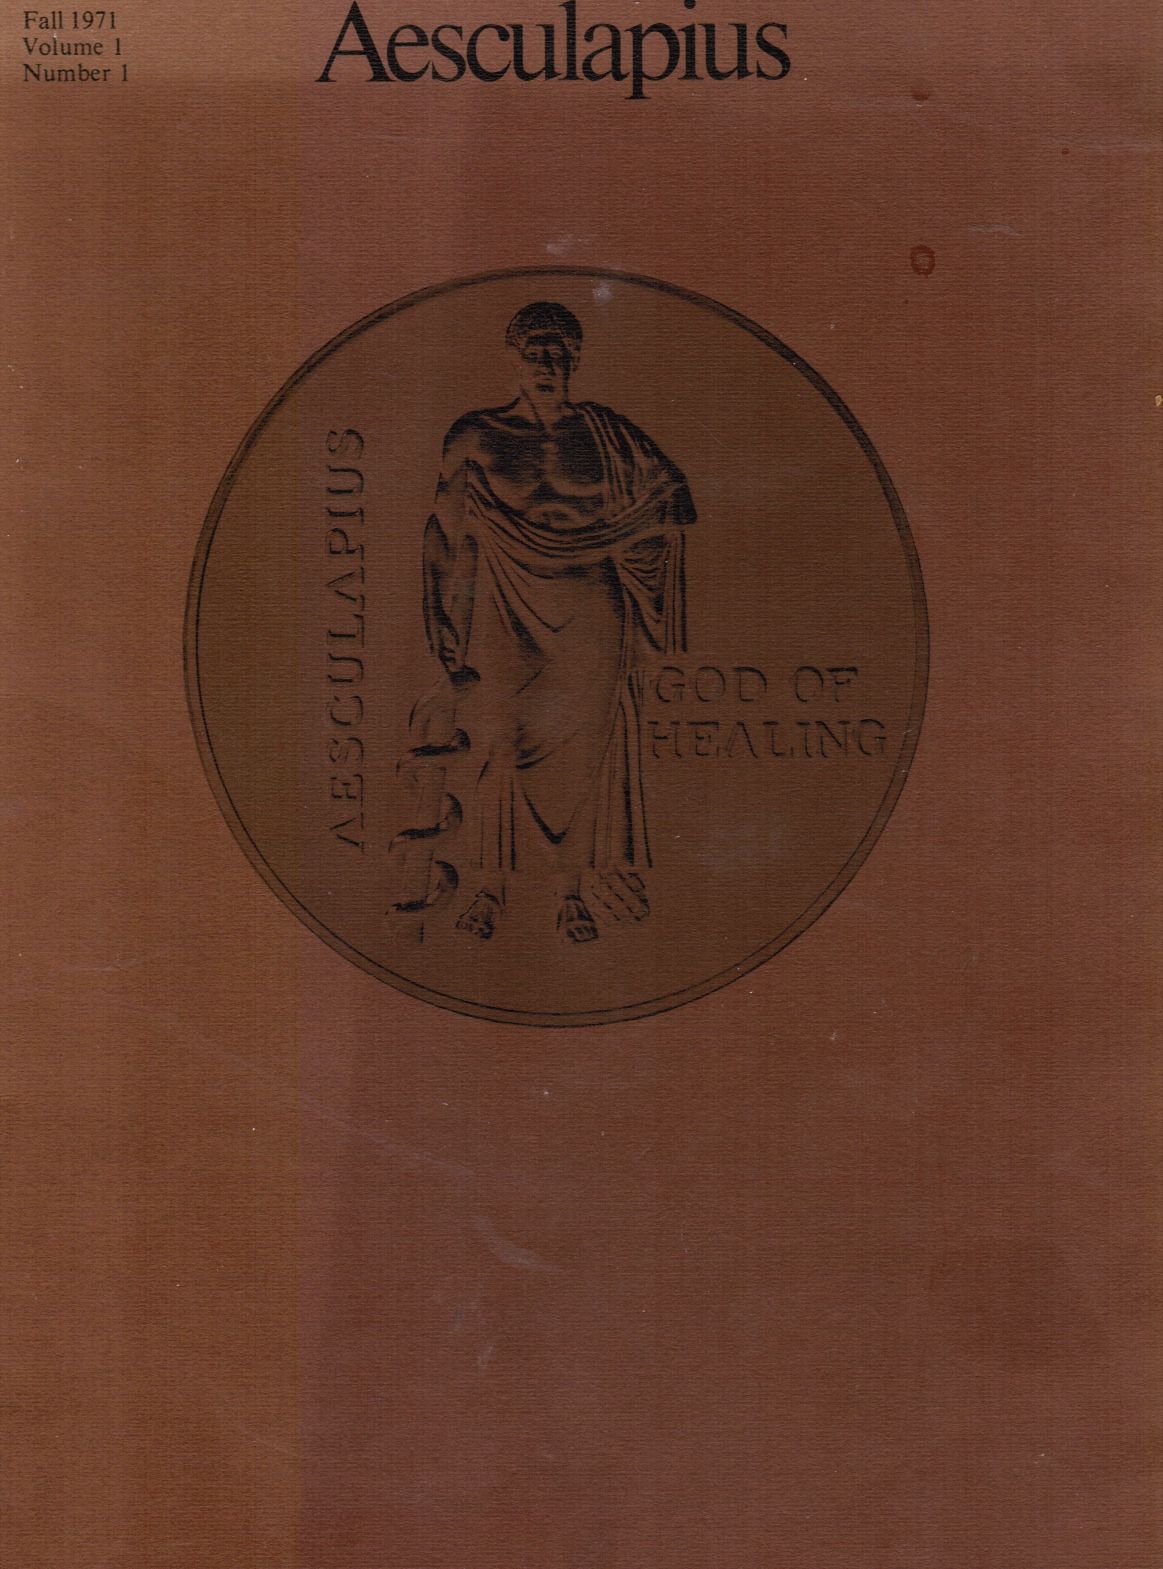 MEDICAL HERITAGE SOCIETY - Aesculapius: Journal of the History of Medicine and Sciences